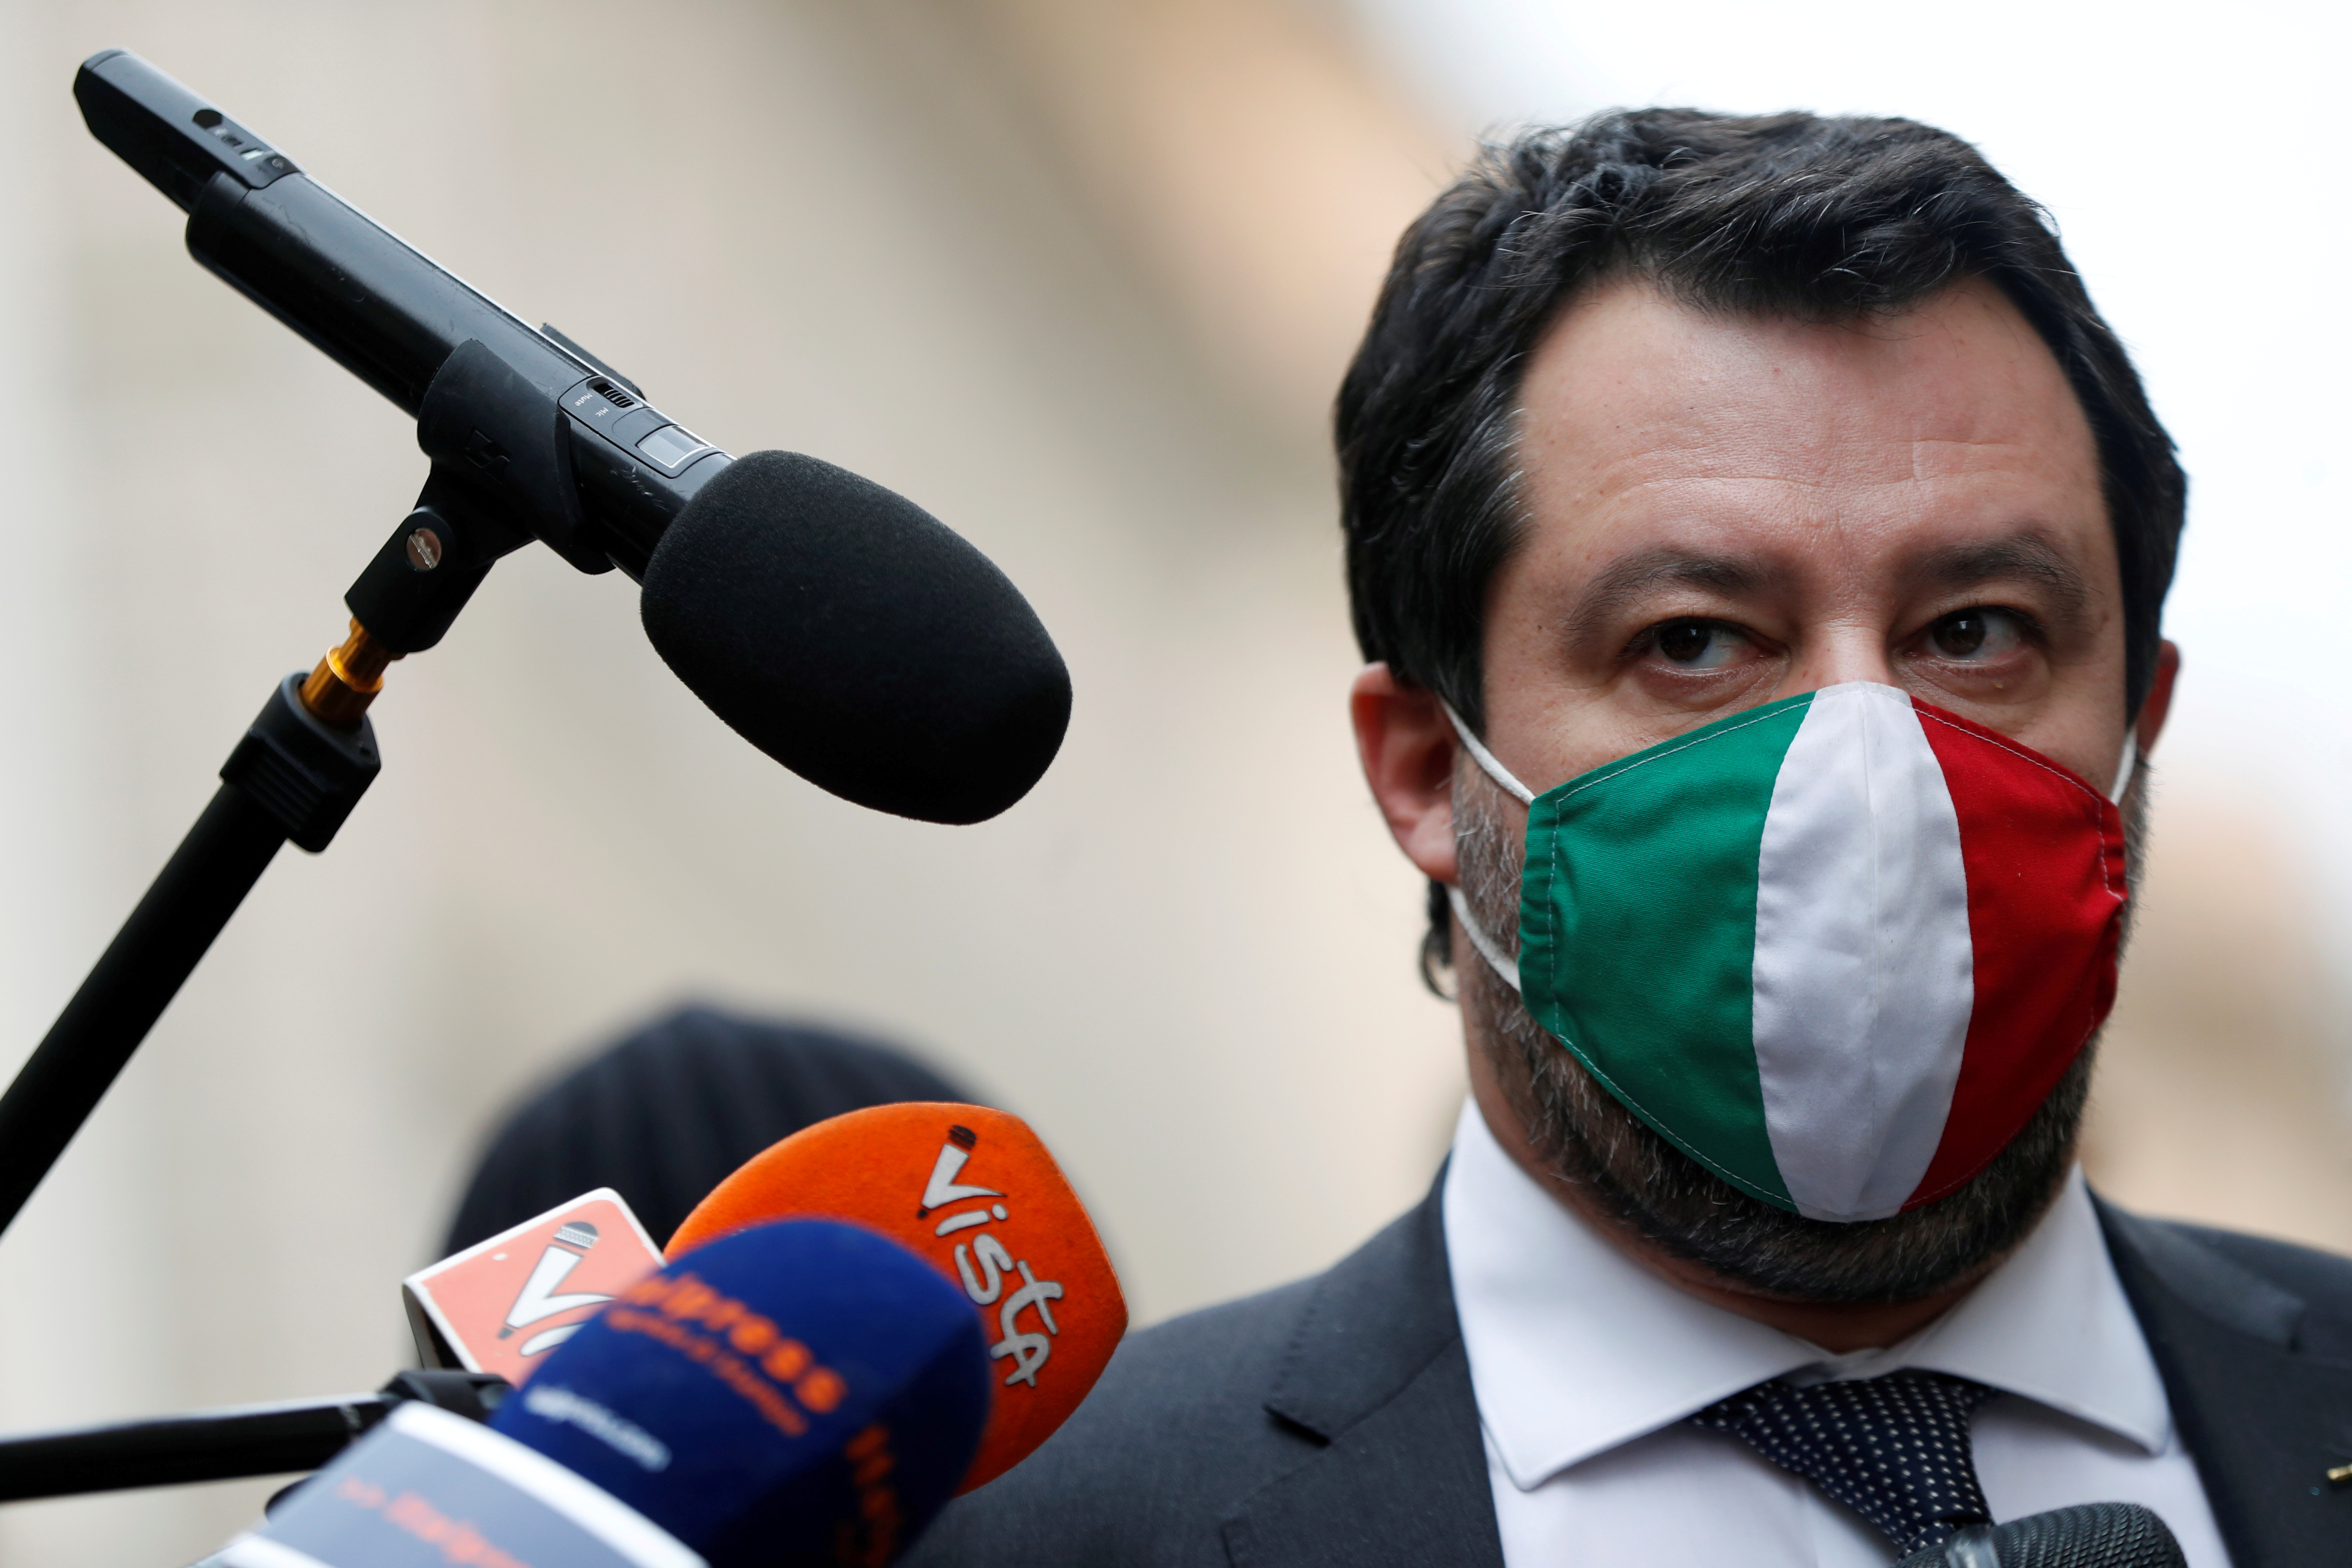 Leader of Italy's far-right League party Matteo Salvini speaks to the media, in Rome